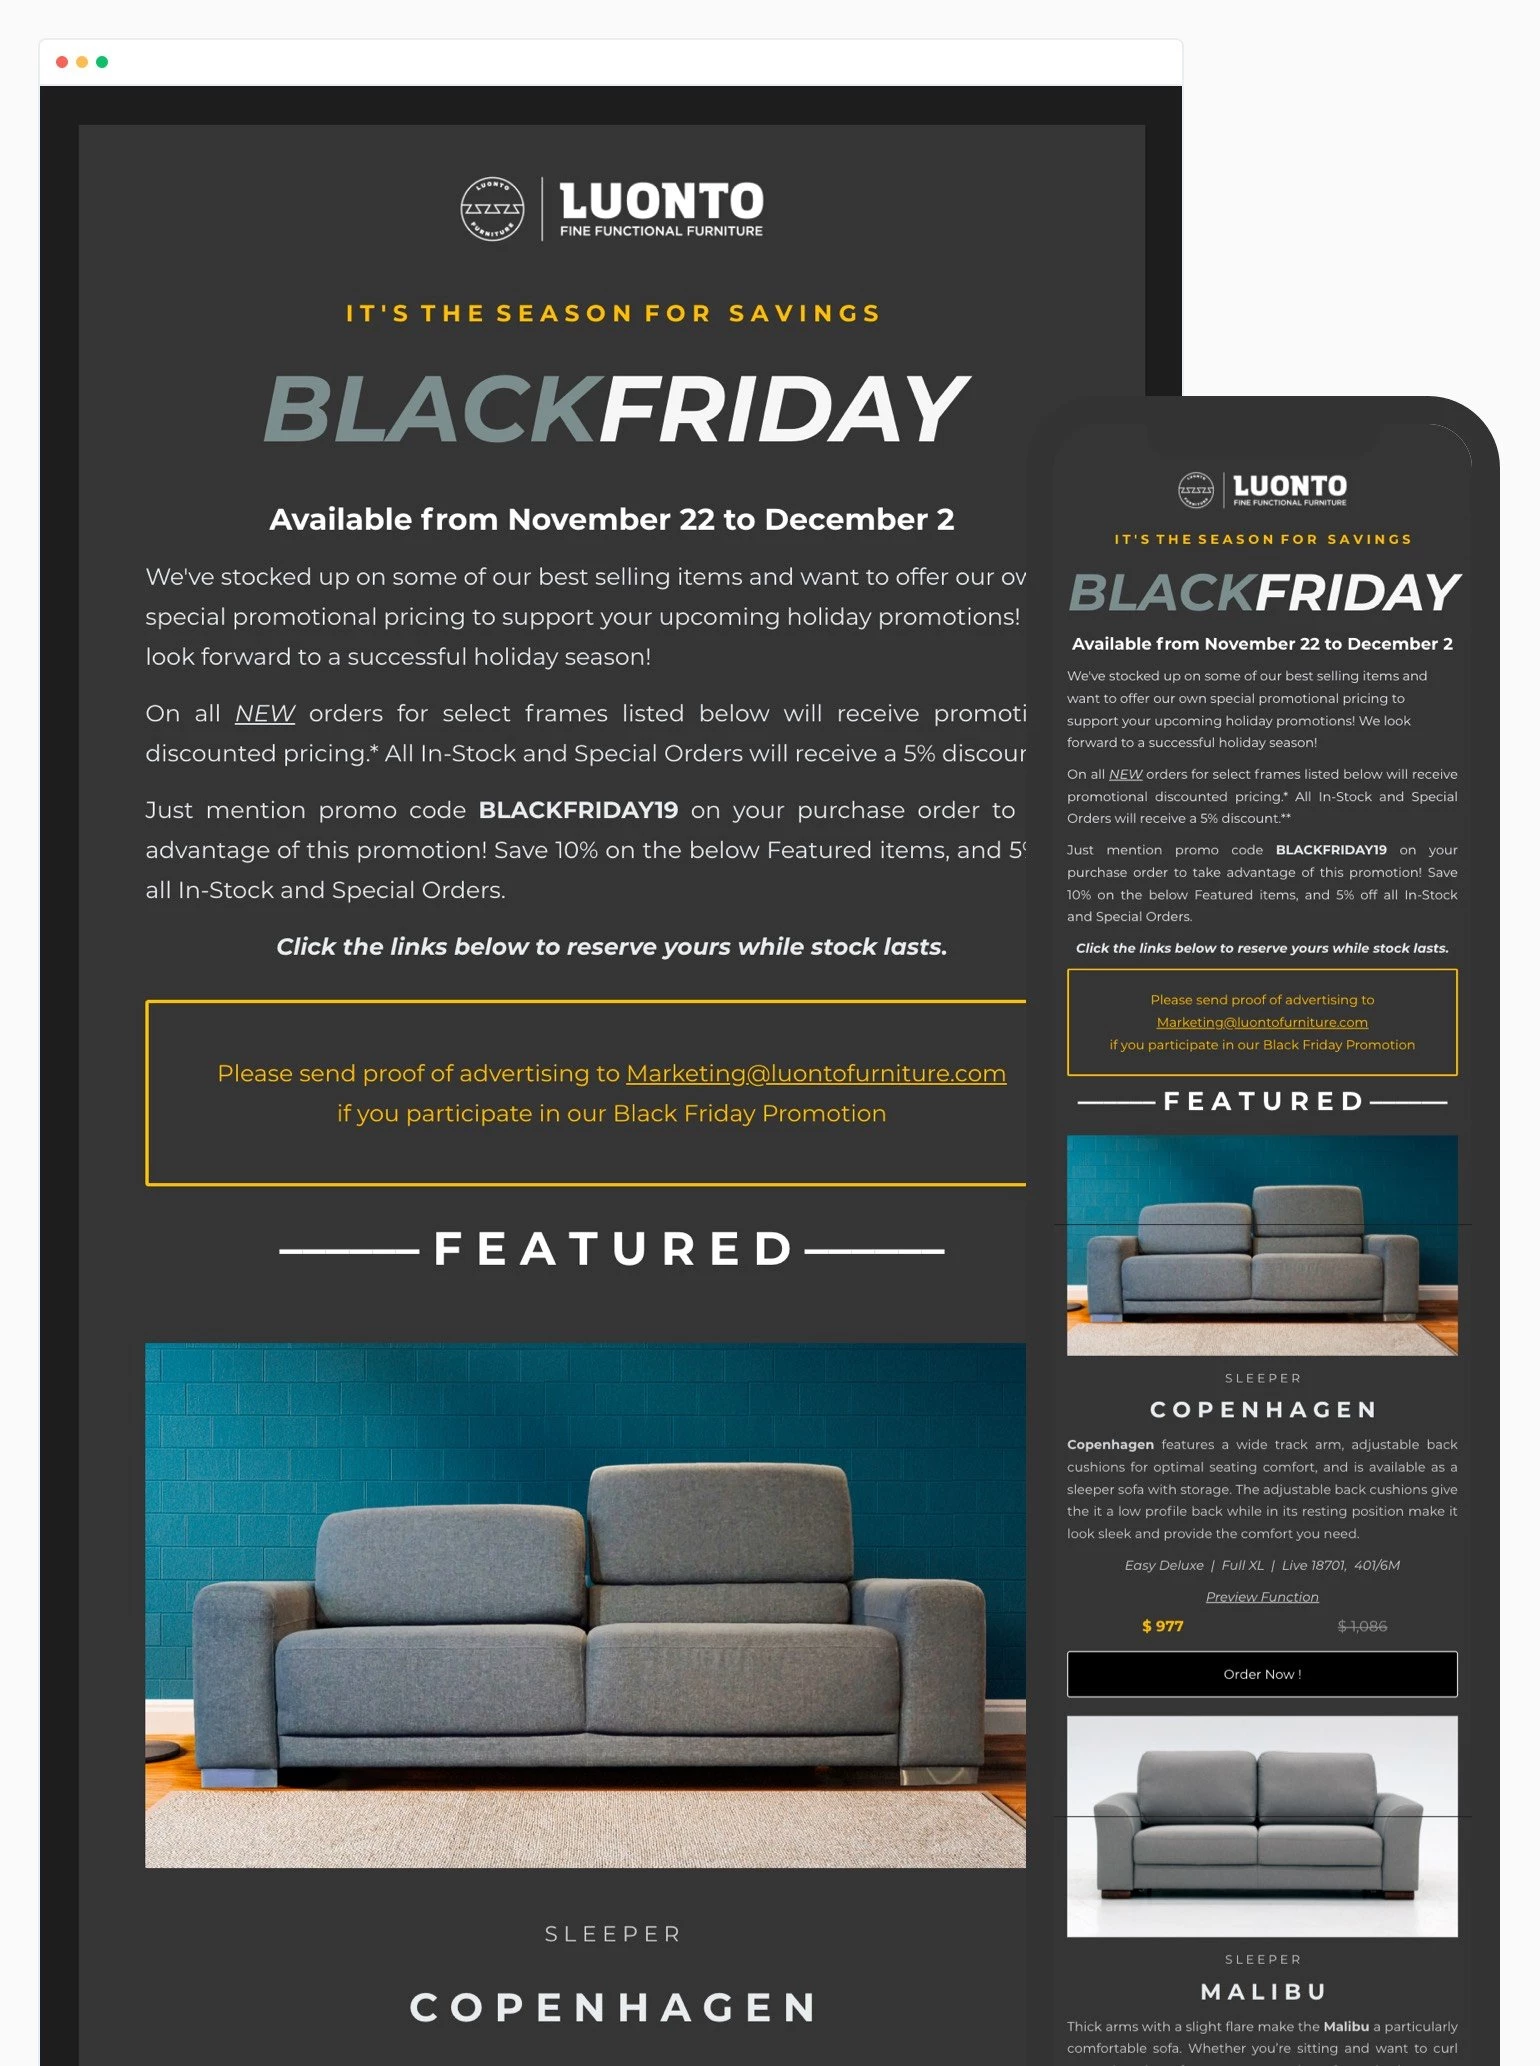 Luonto Black Friday email example